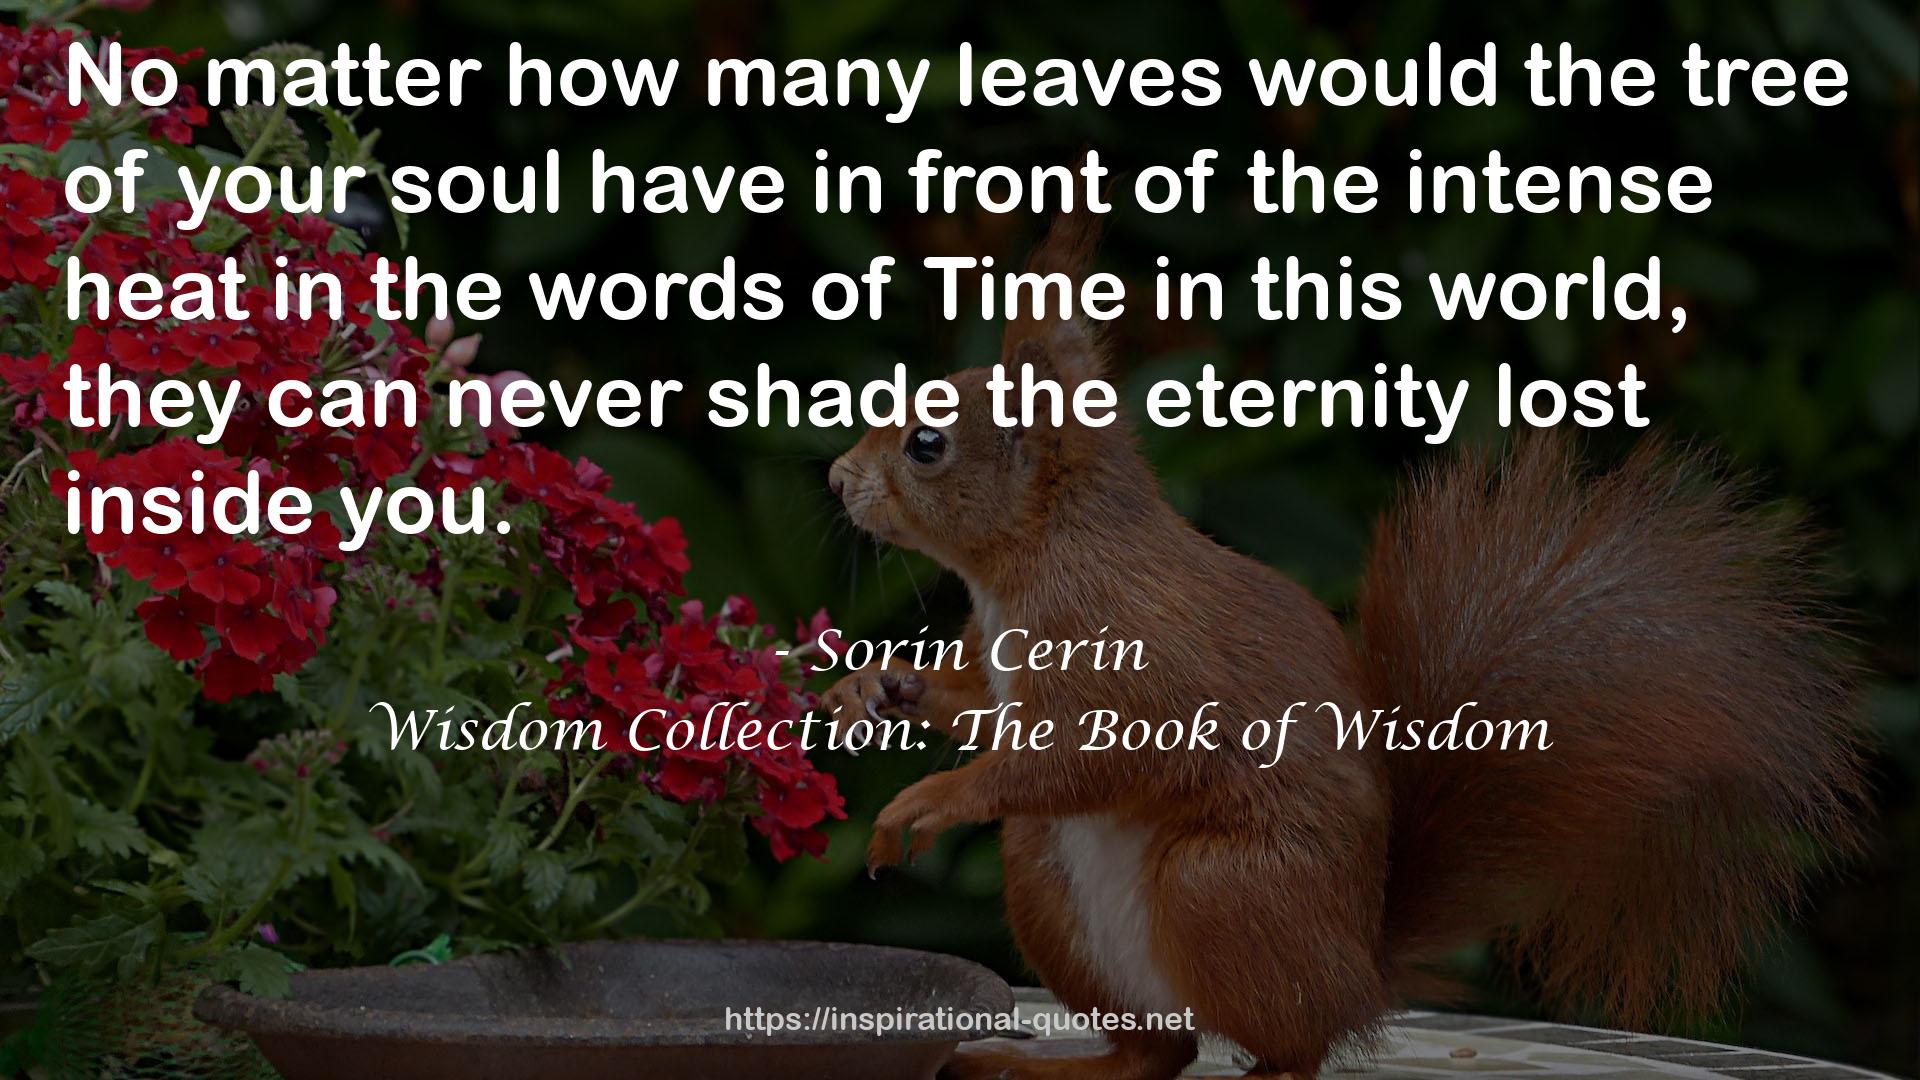 Wisdom Collection: The Book of Wisdom QUOTES